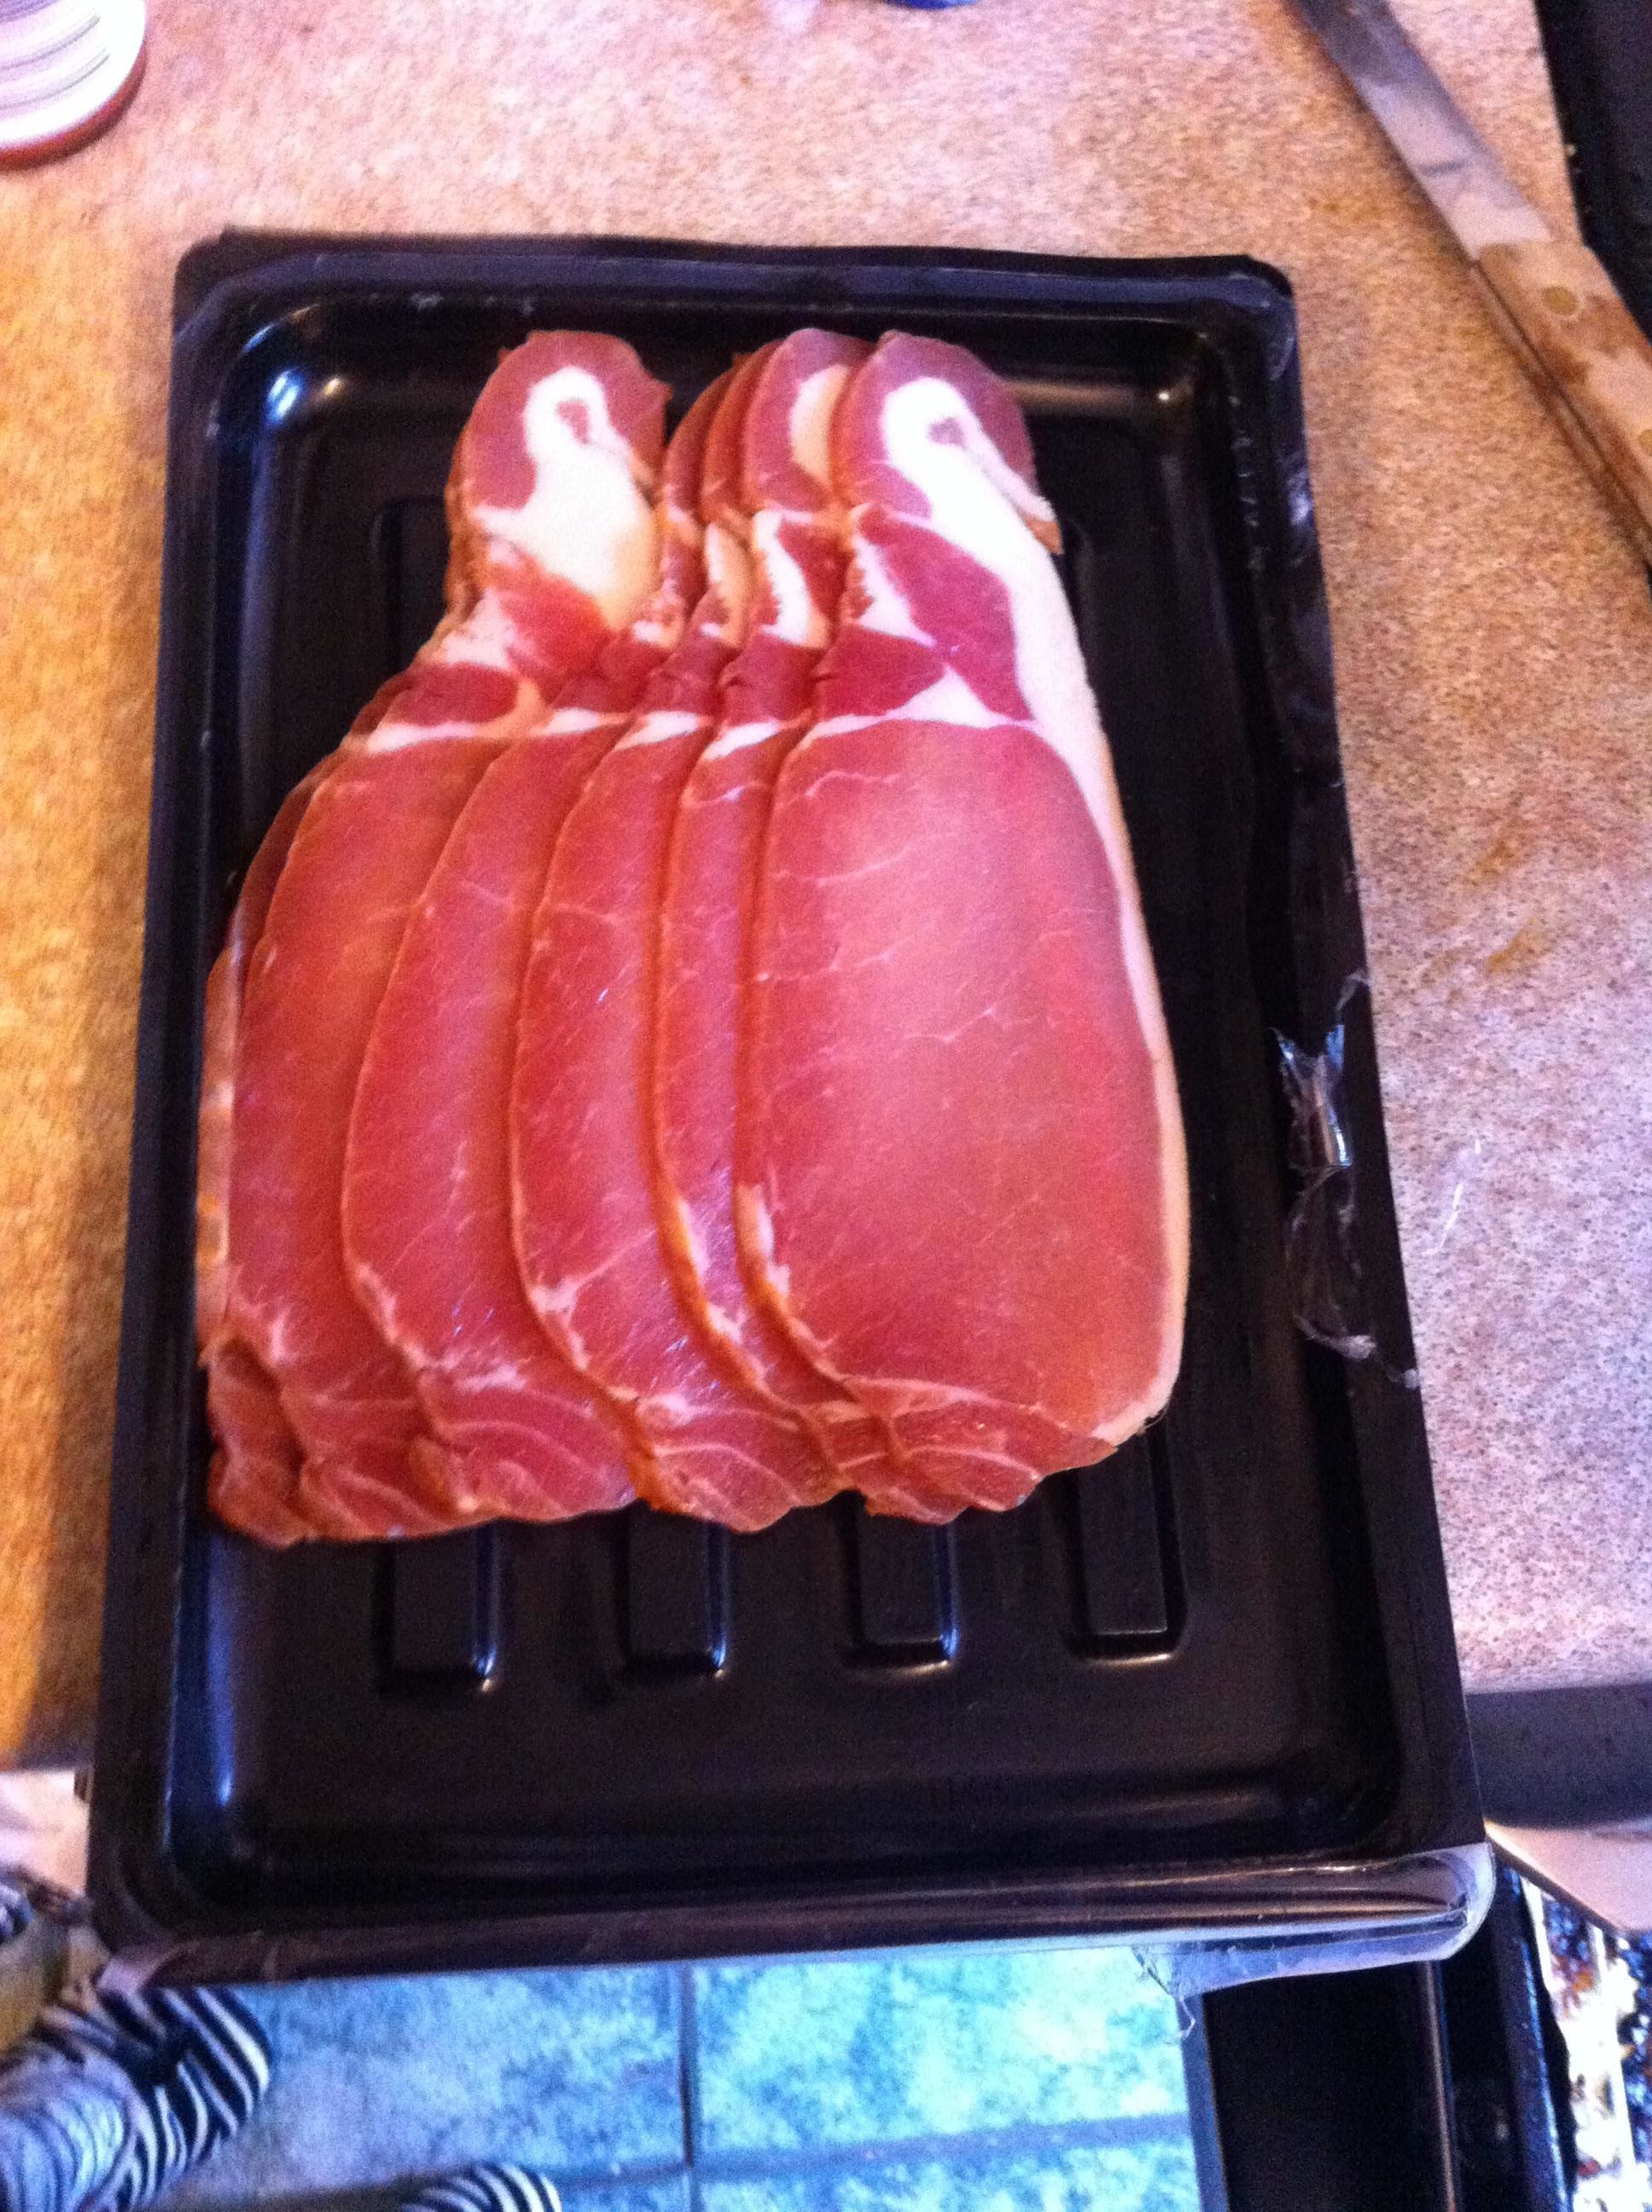 A stack of bacon that looks like a stack of penguins.